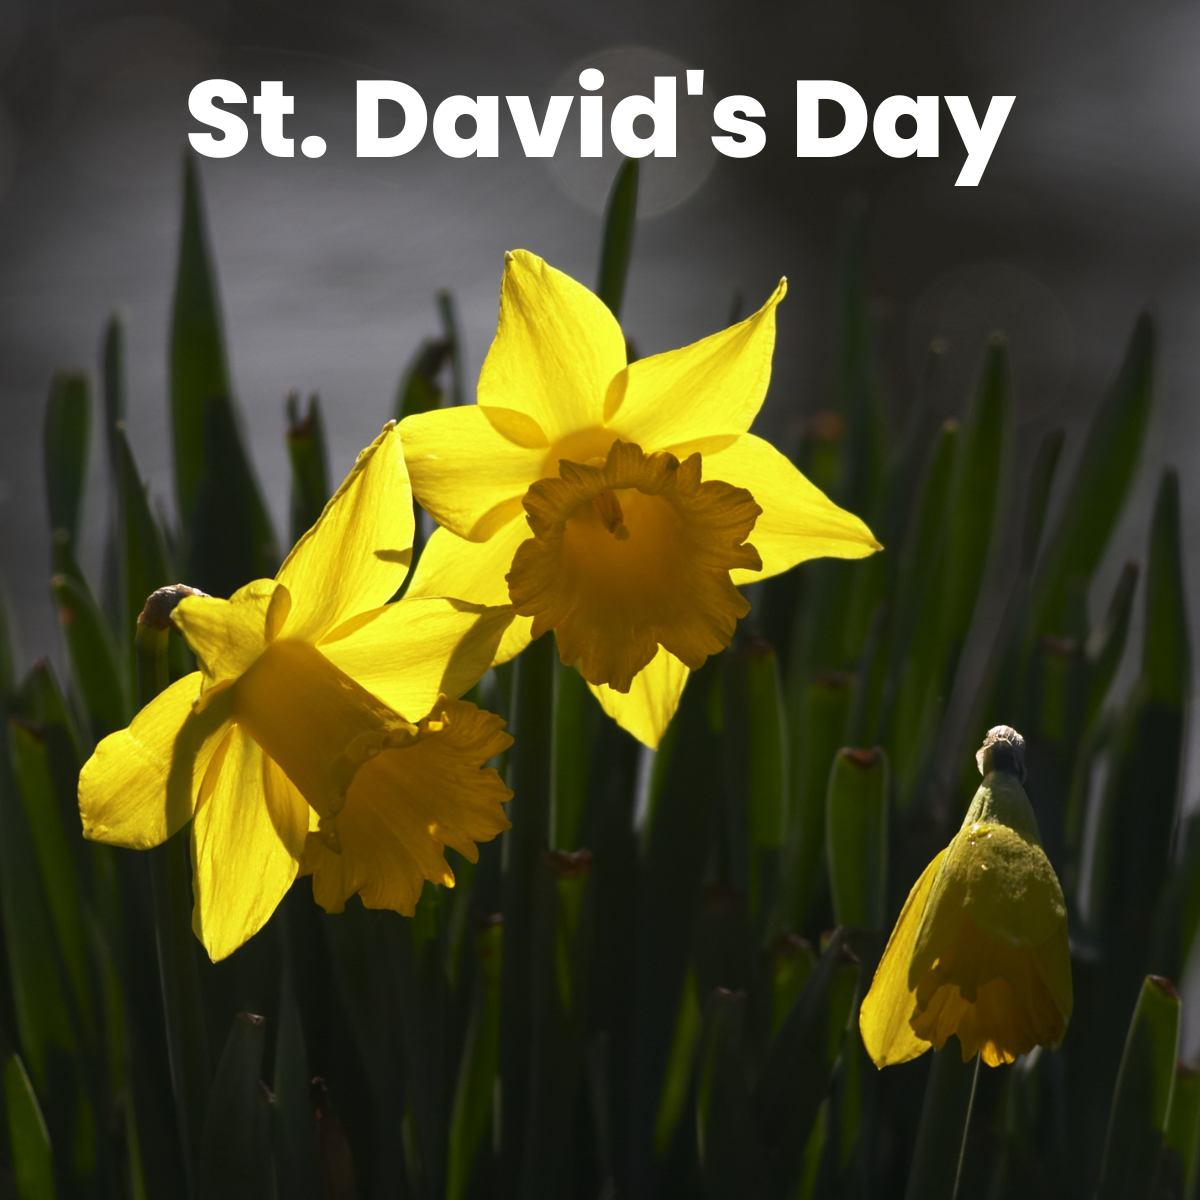 St. David's Day 2023 Quotes, Messages, Greetings, Wishes, Images, Sayings, Cliparts, Captions, and Posters